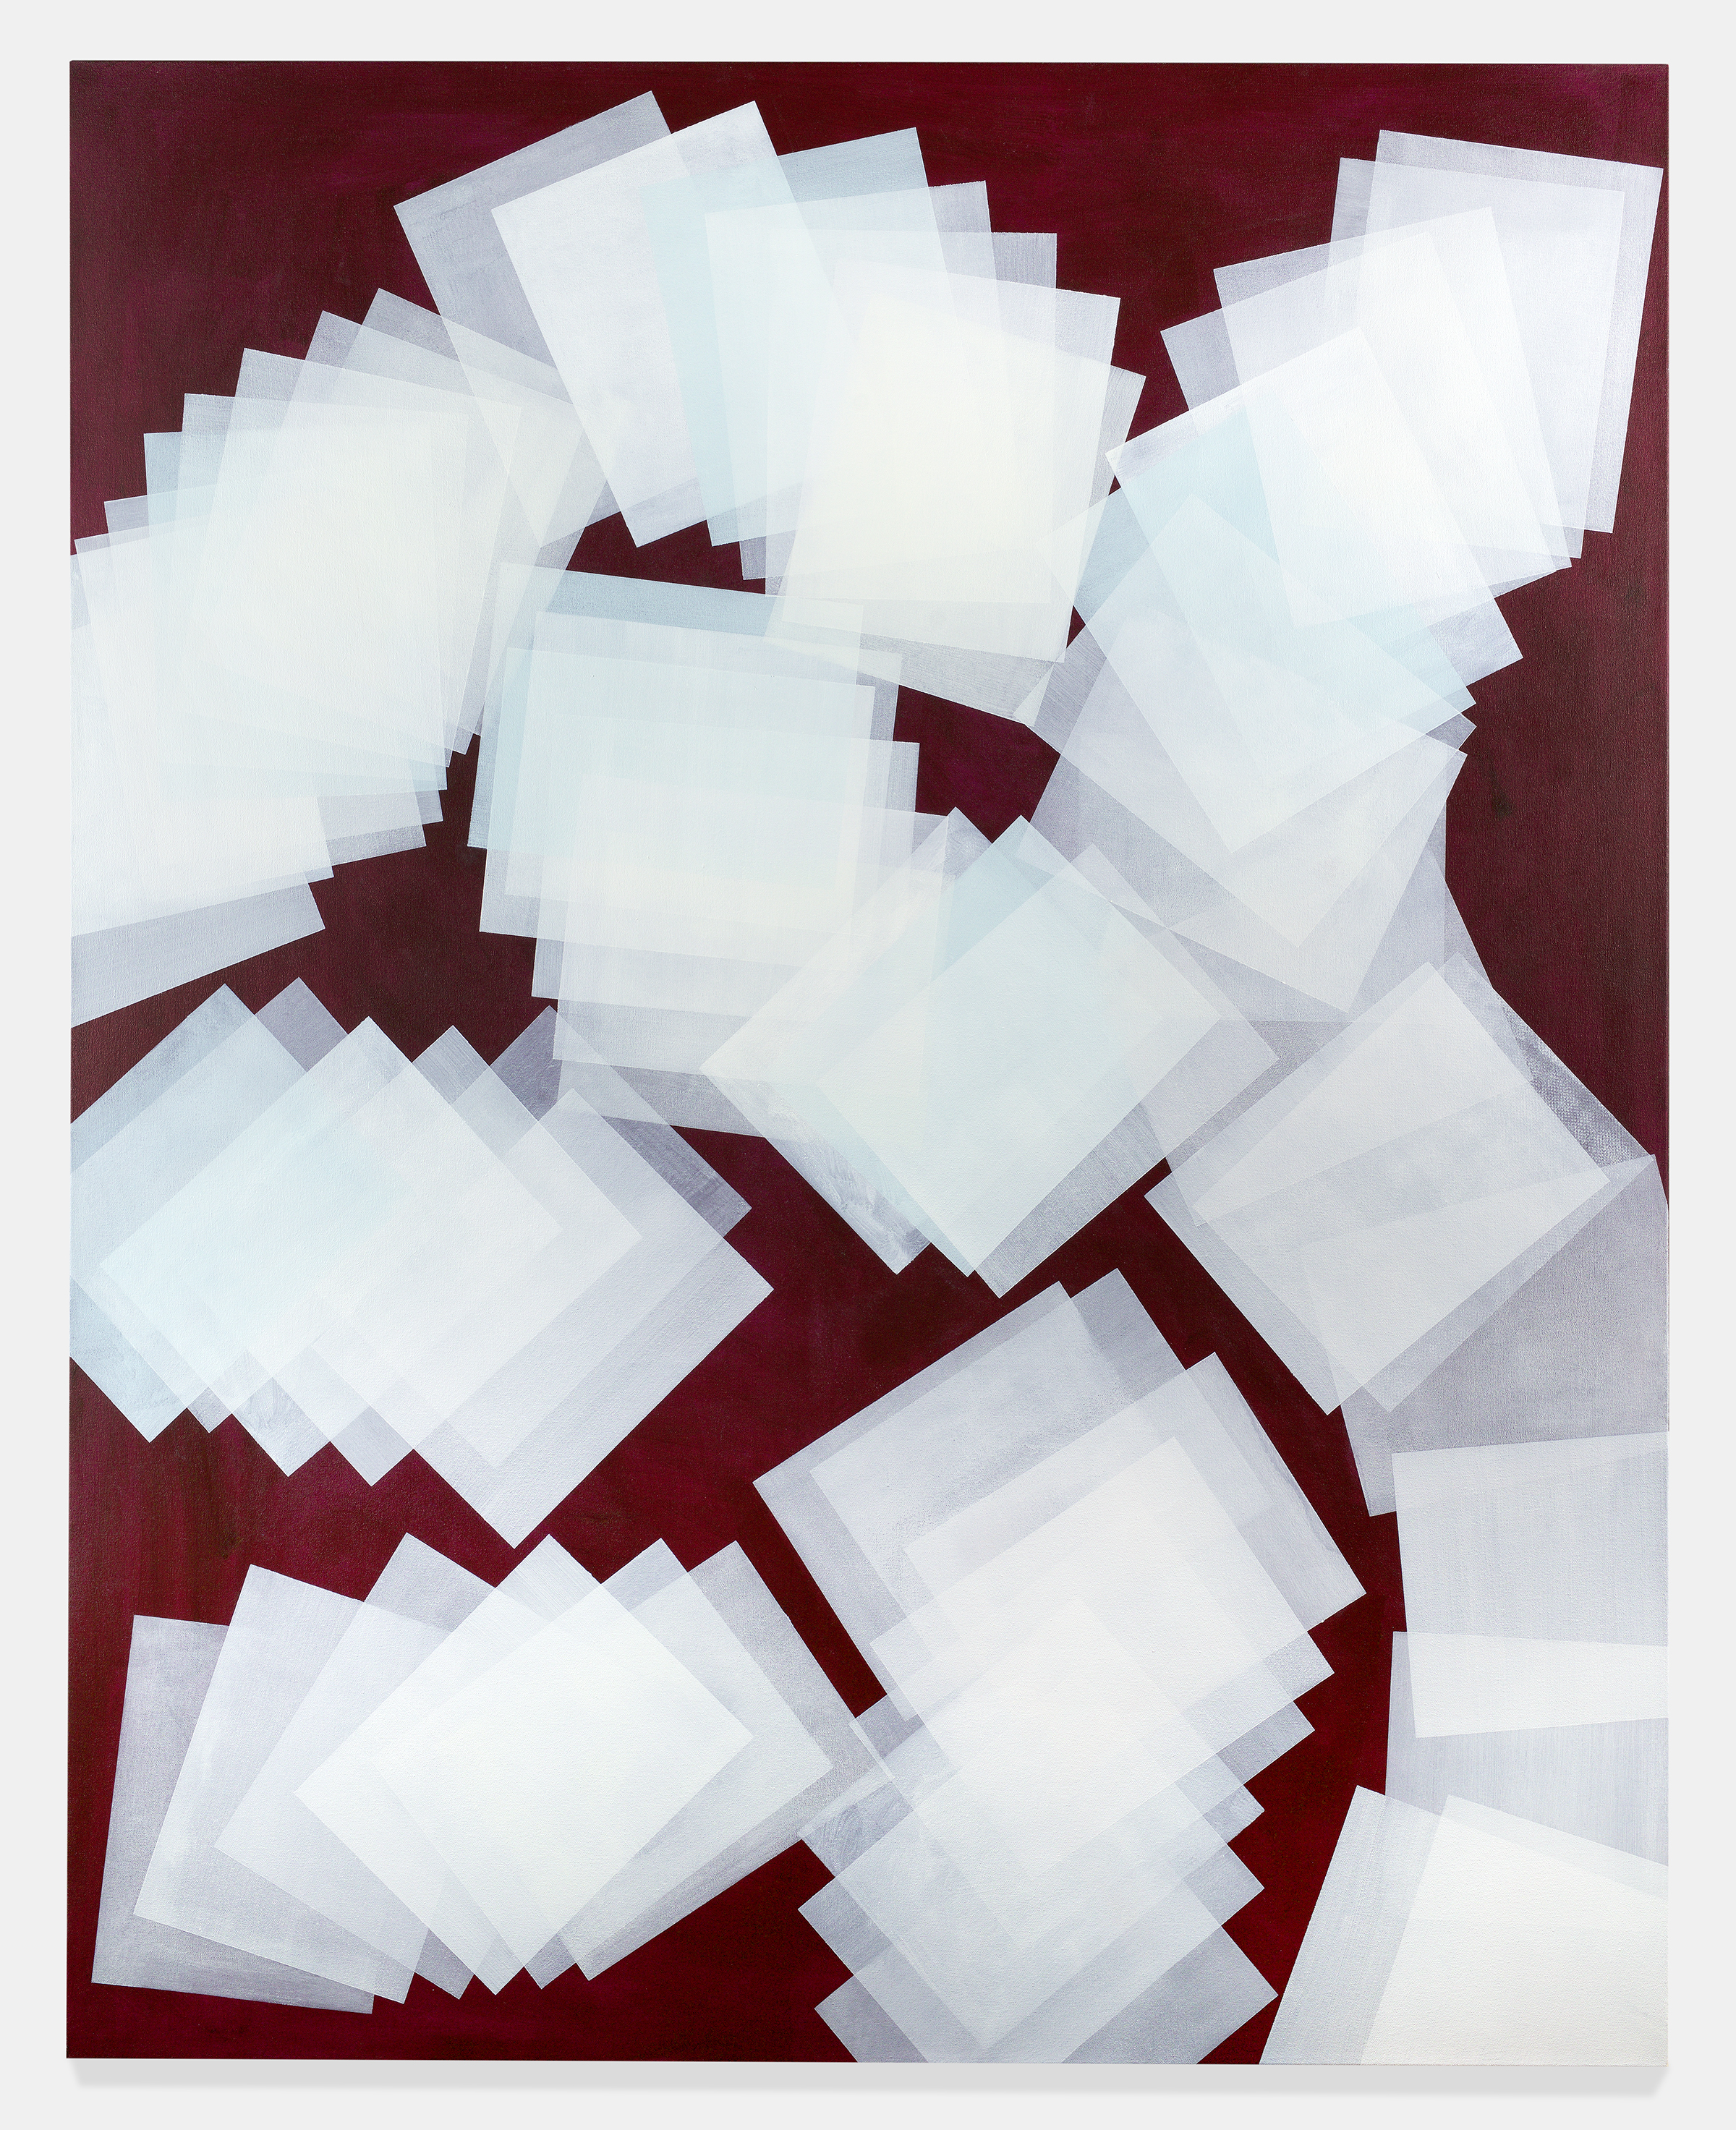  Untitled, ‘Ice Cold’, 2018  From the ‘Paperwork’ series  Oil on canvas  121.9 by 152.4 cm (48 by 60 in.)  (studio) 